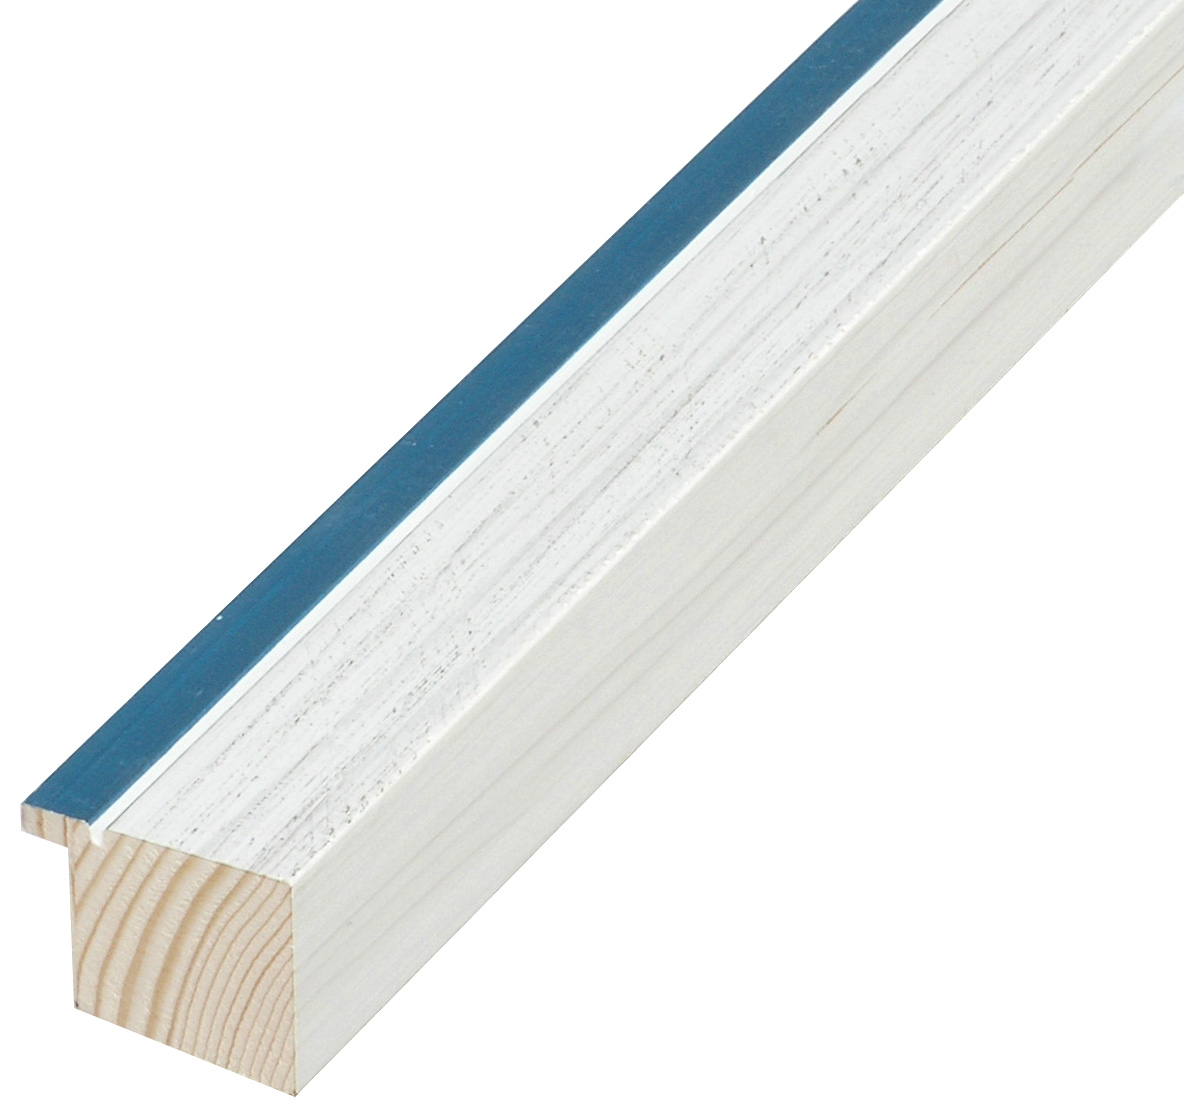 Moulding finger-jointed pine height 33mm - White, blue edge